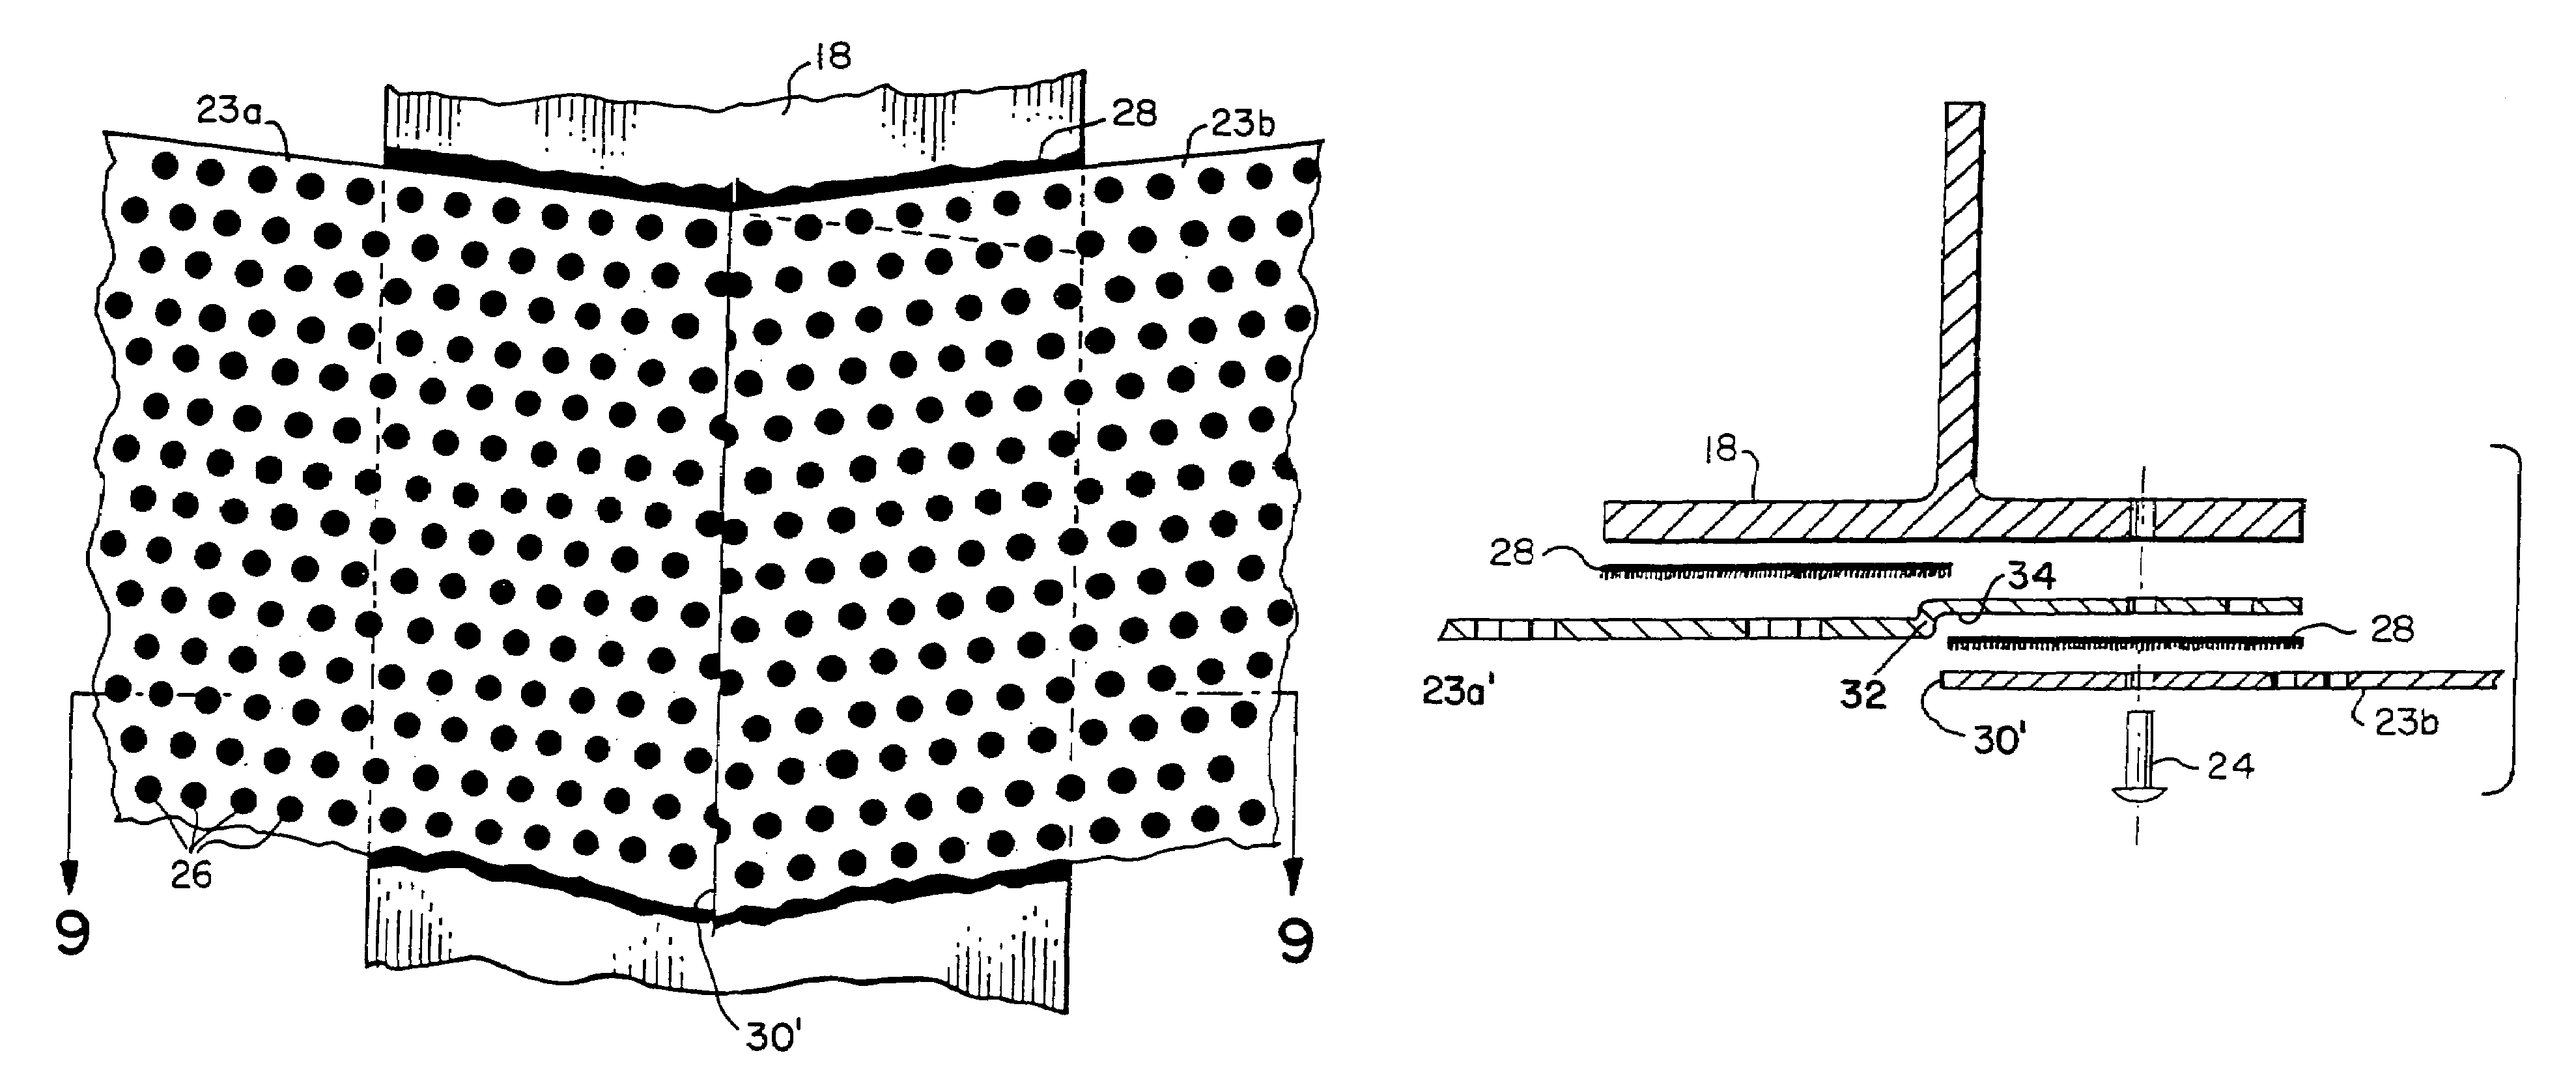 Perforate projection screen with inconspicuous seams